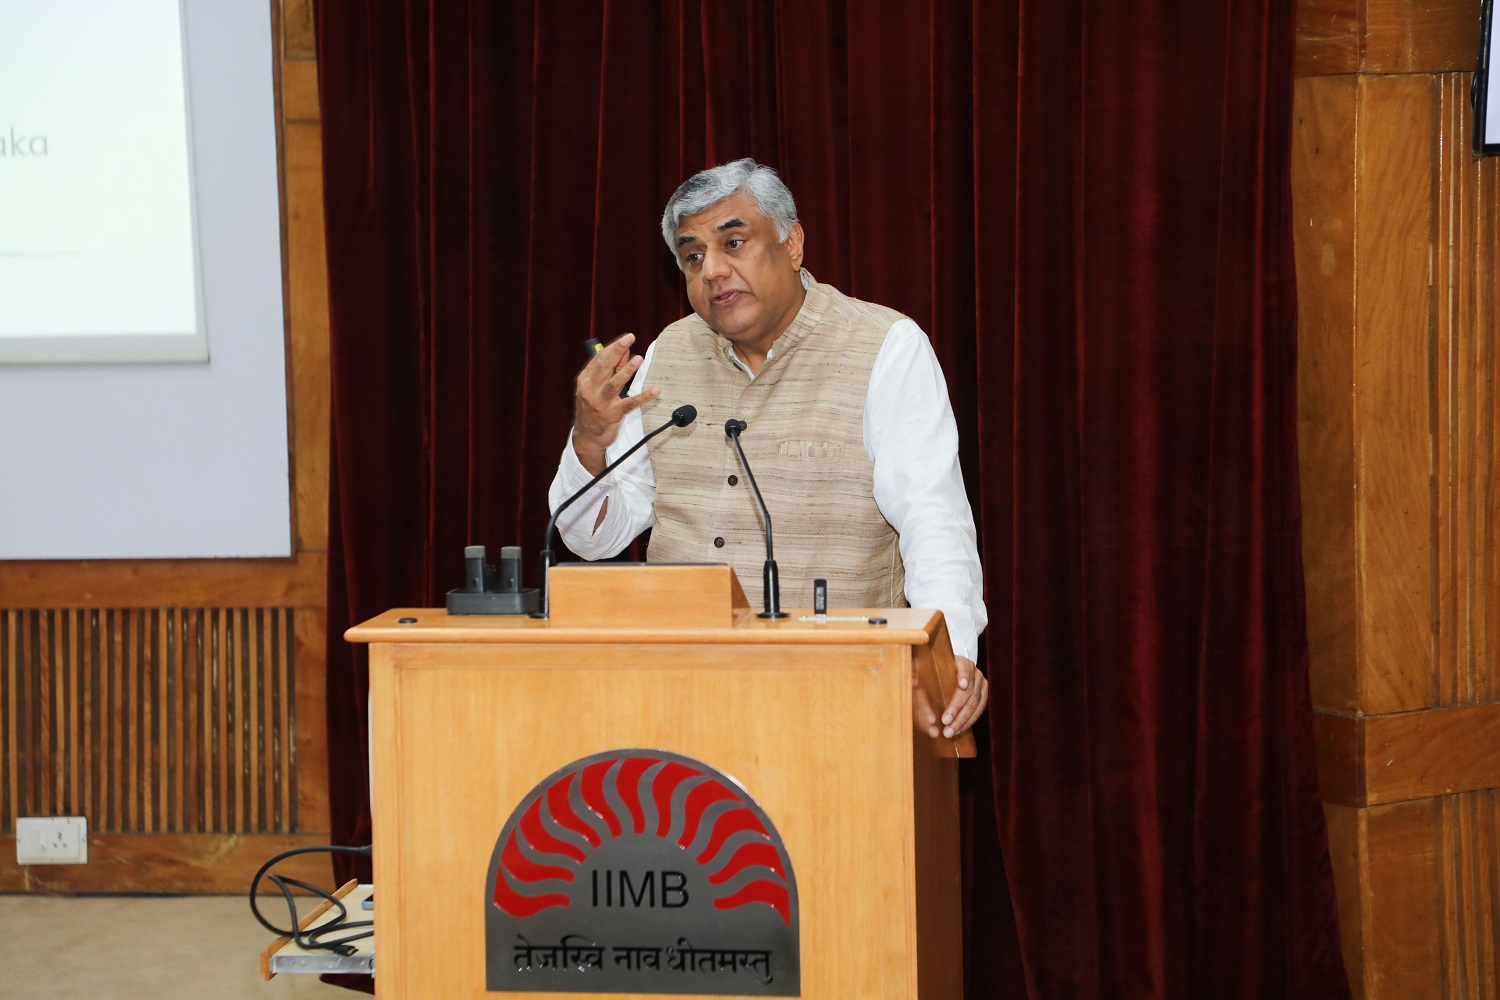 Shri Rajeev Gowda, Vice Chairman, Karnataka SITK, the Chief Guest for the event, delivers the special address on, ‘Development Paths in Karnataka: A View through the SITK Lens’.